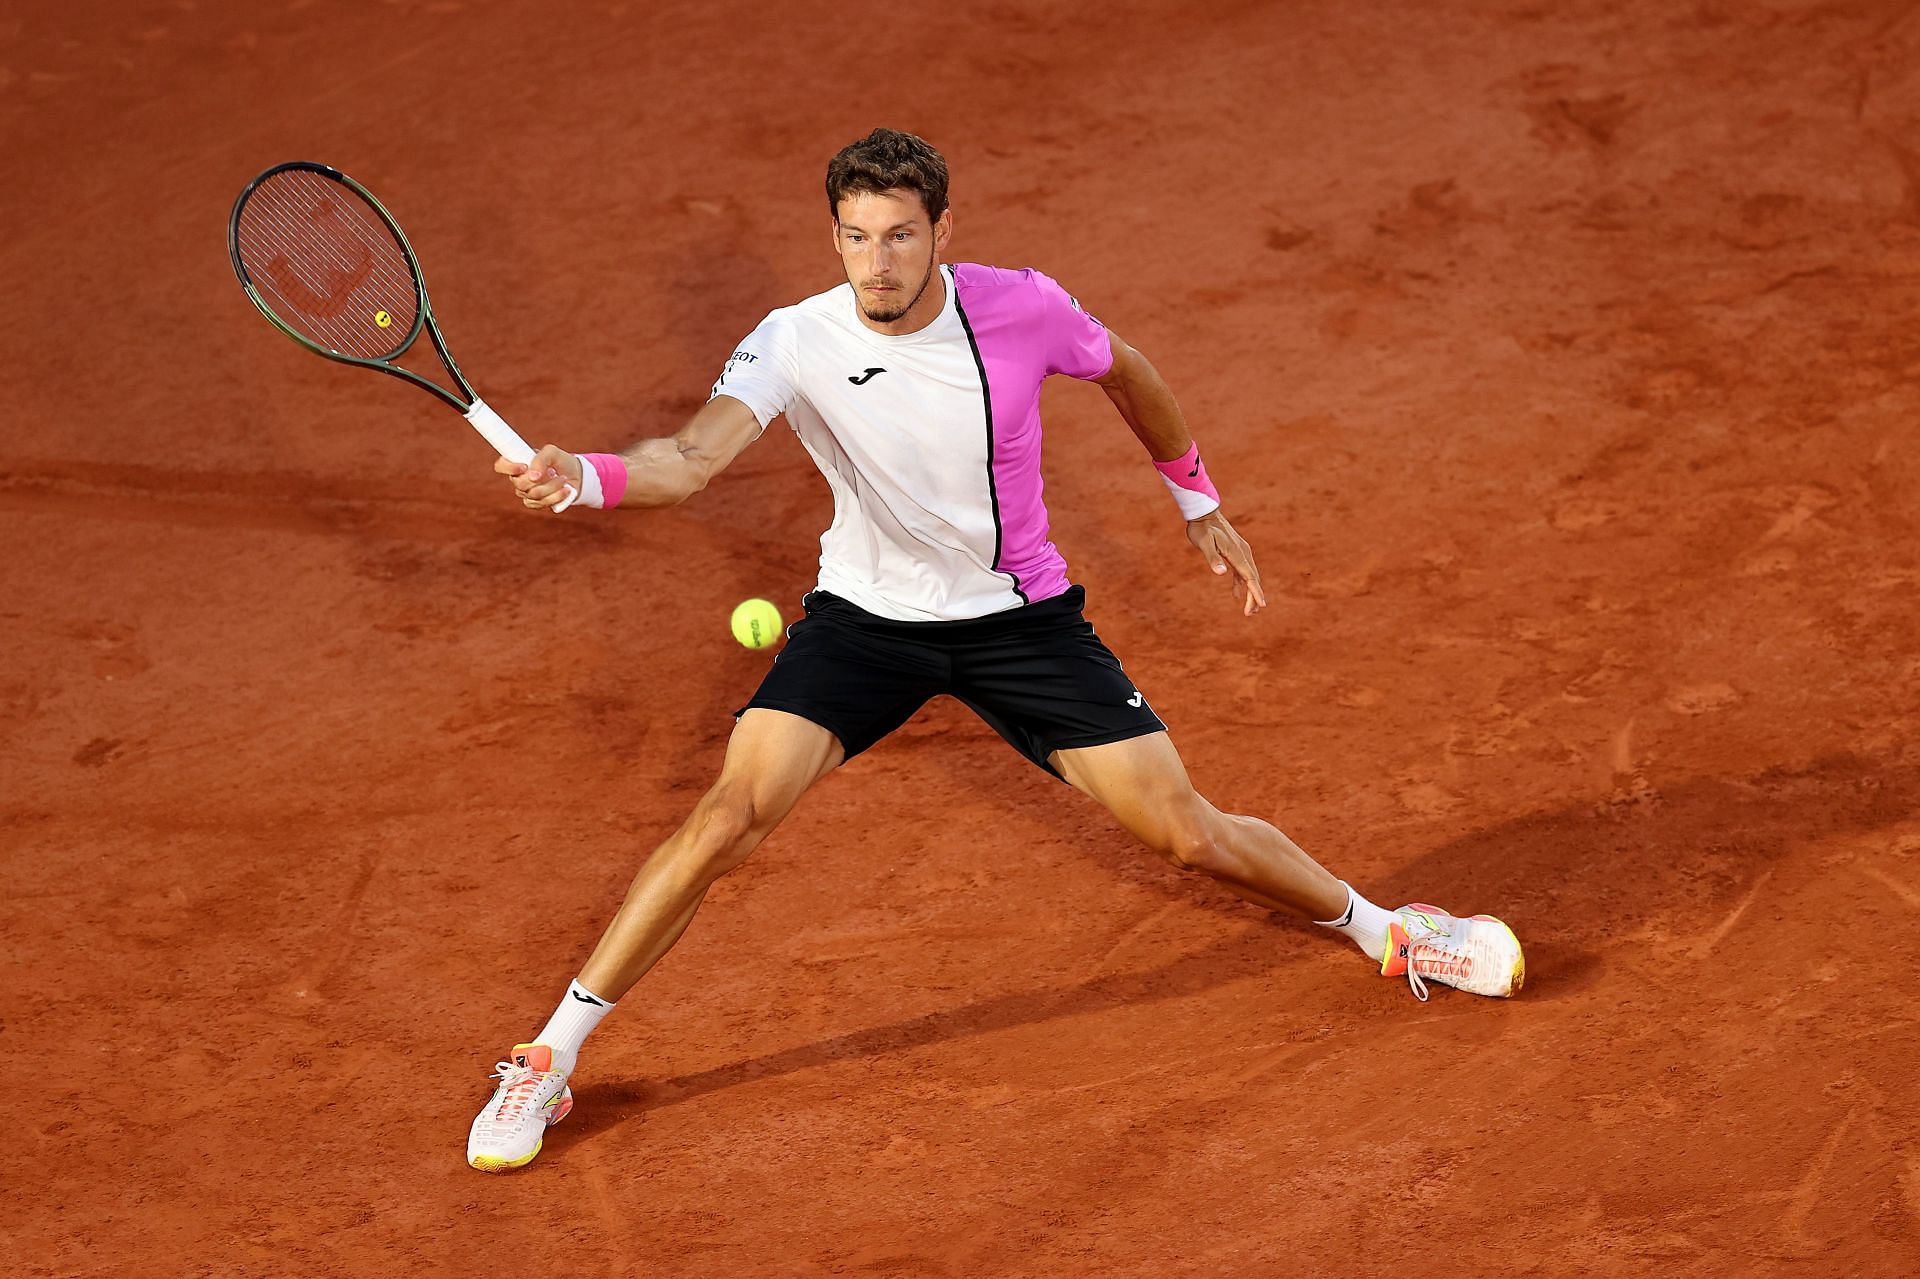 Pablo Carreno Busta at the 2022 French Open - Day Three